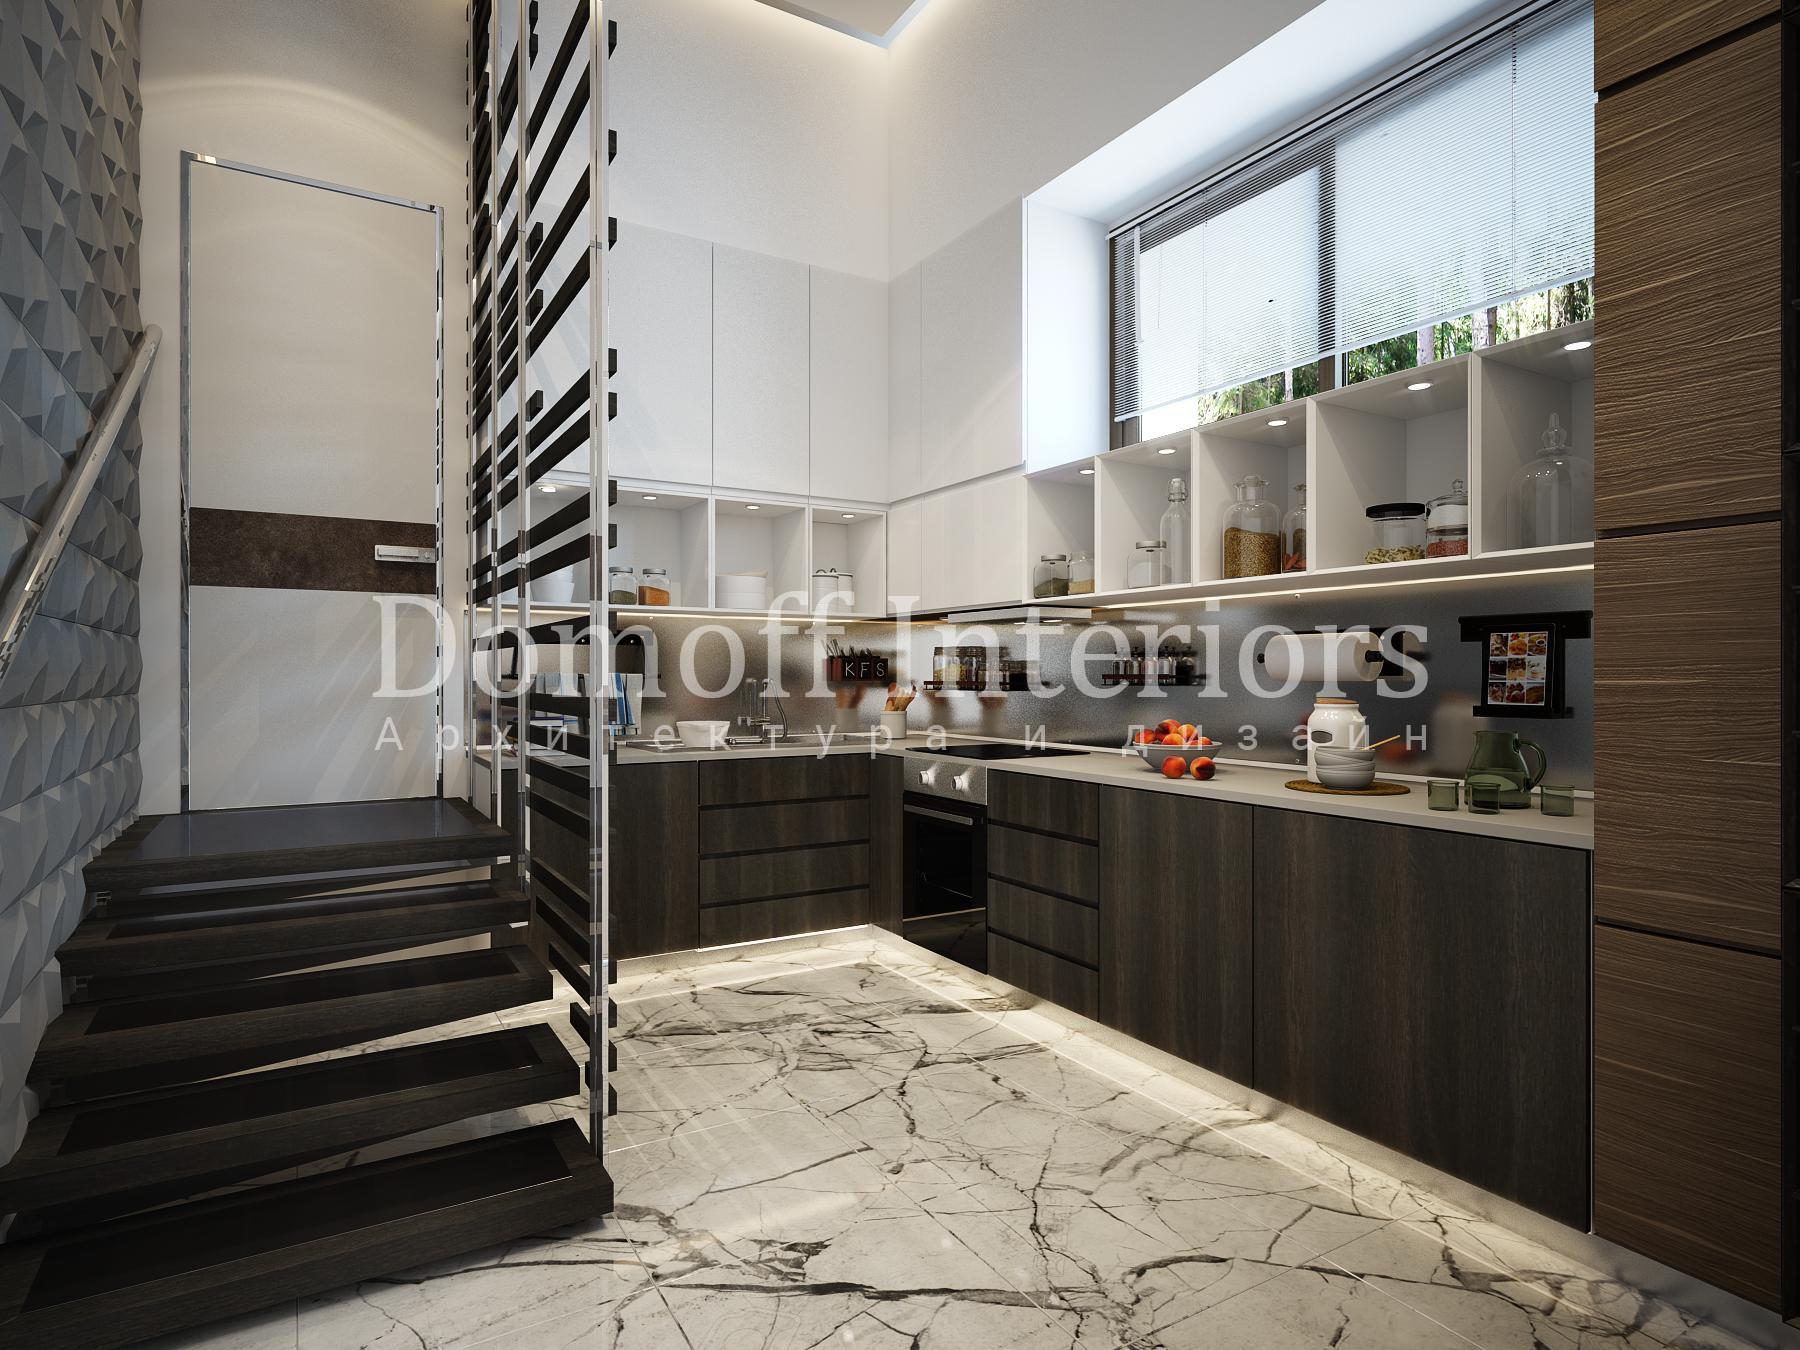 Technical kitchen made in the style of Contemporary Eclecticism